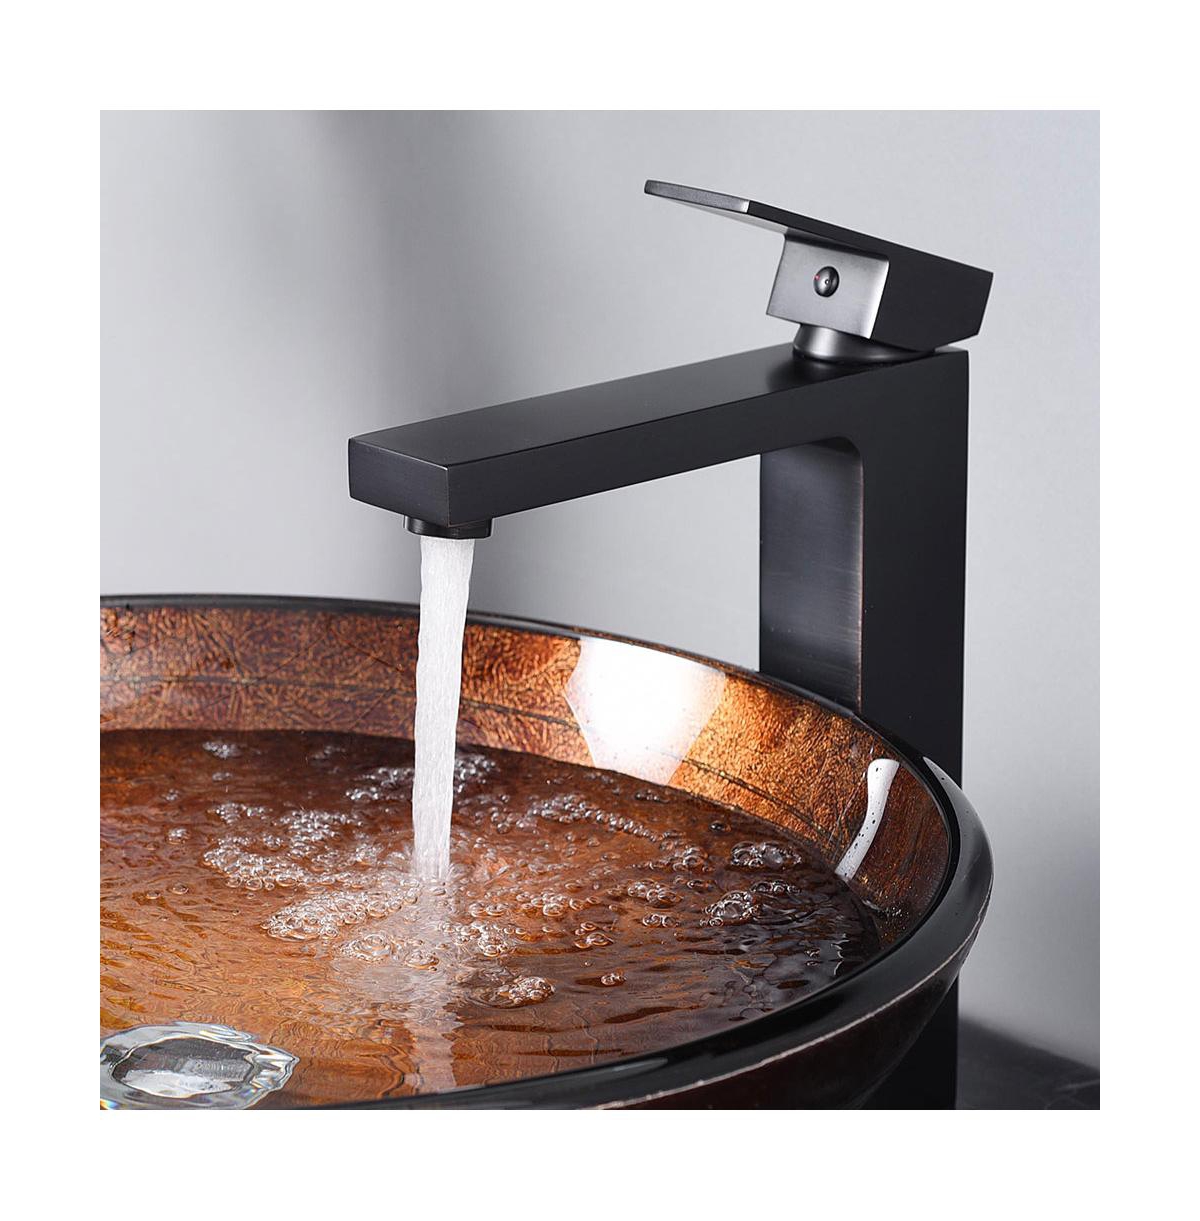 Aquaterior Home Bathroom Faucet Tall Cold & Hot Water f/ Above Counter Vessel Sink Orb - Natrual